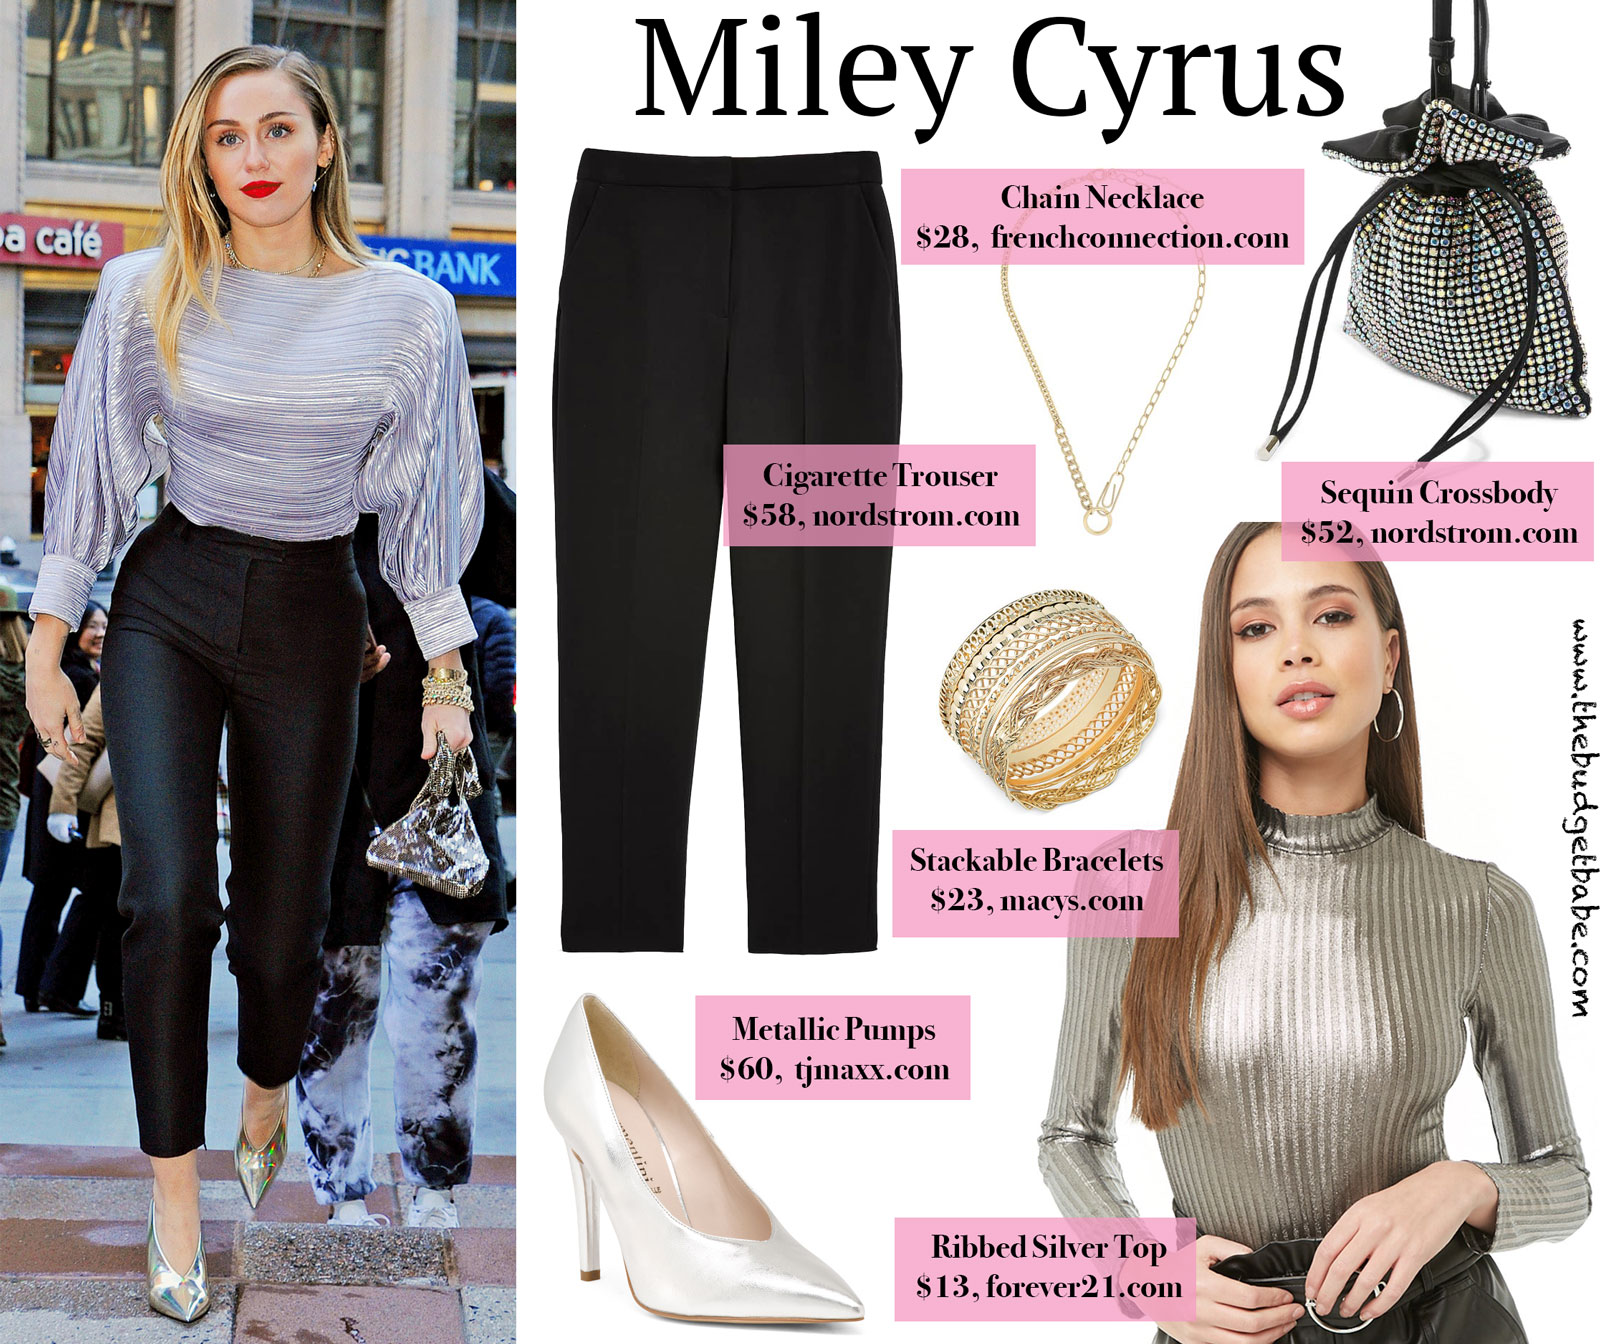 Miley Cyrus Loui Vuitton Silver Top Look for Less